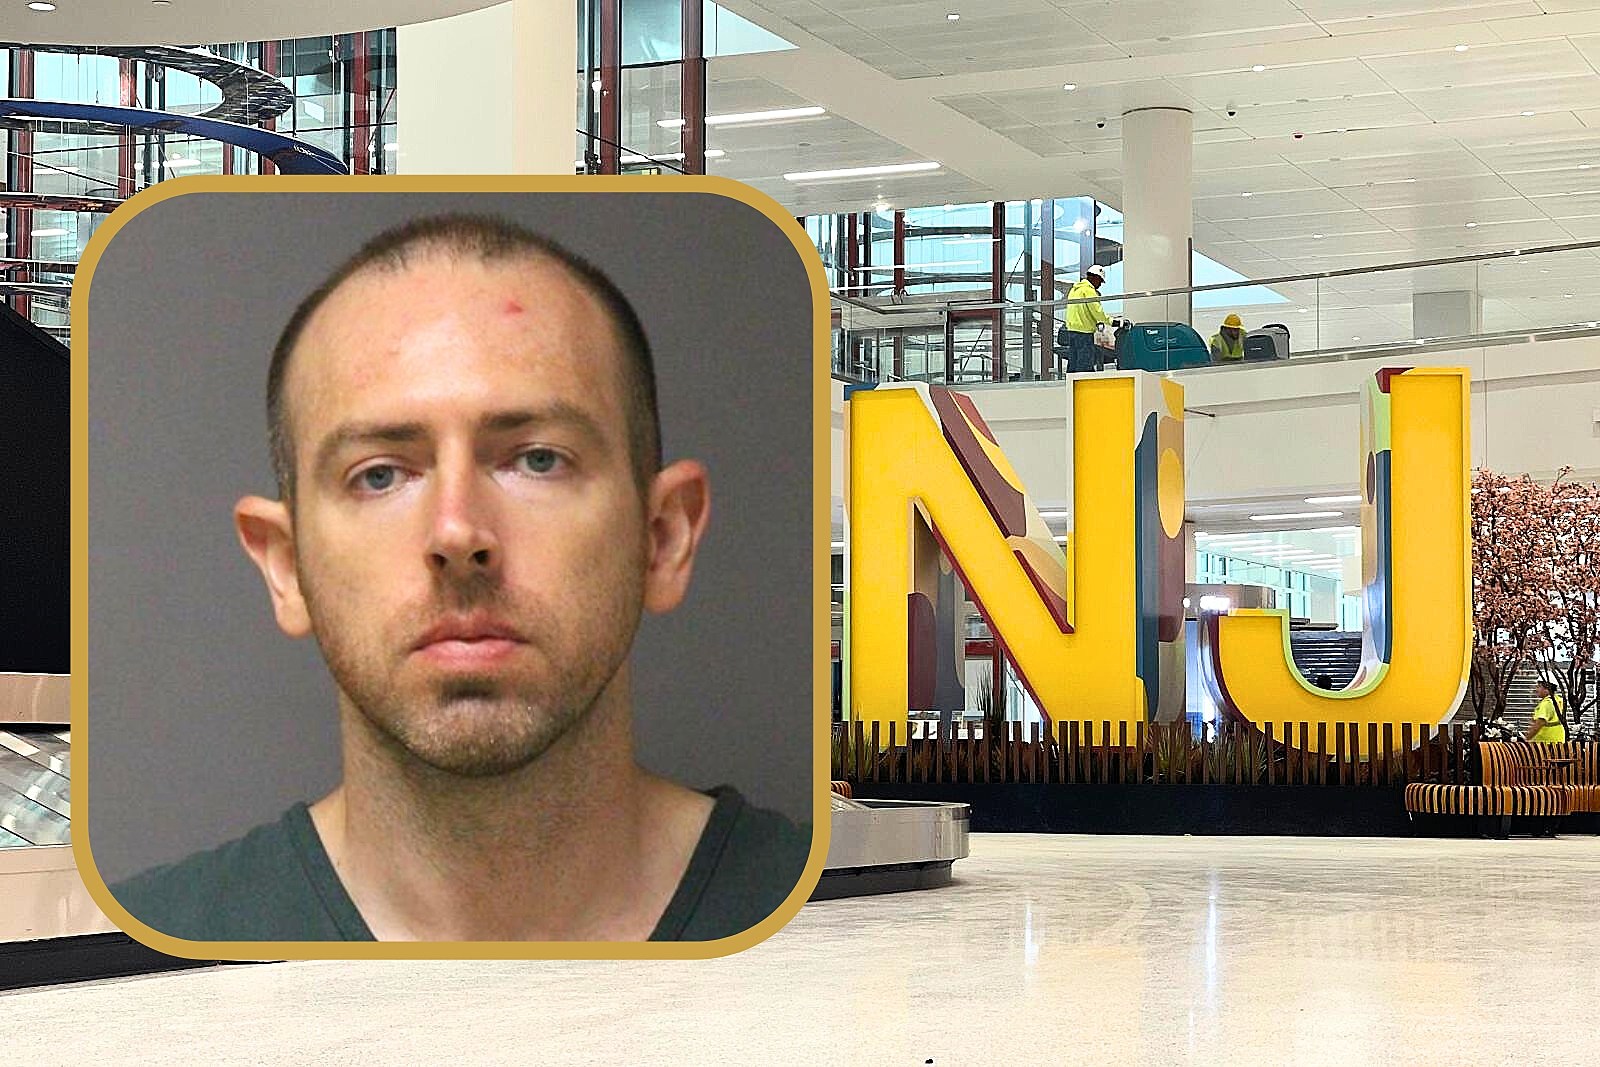 Man caught flying to NJ for more sex with 14-year-old, cops photo